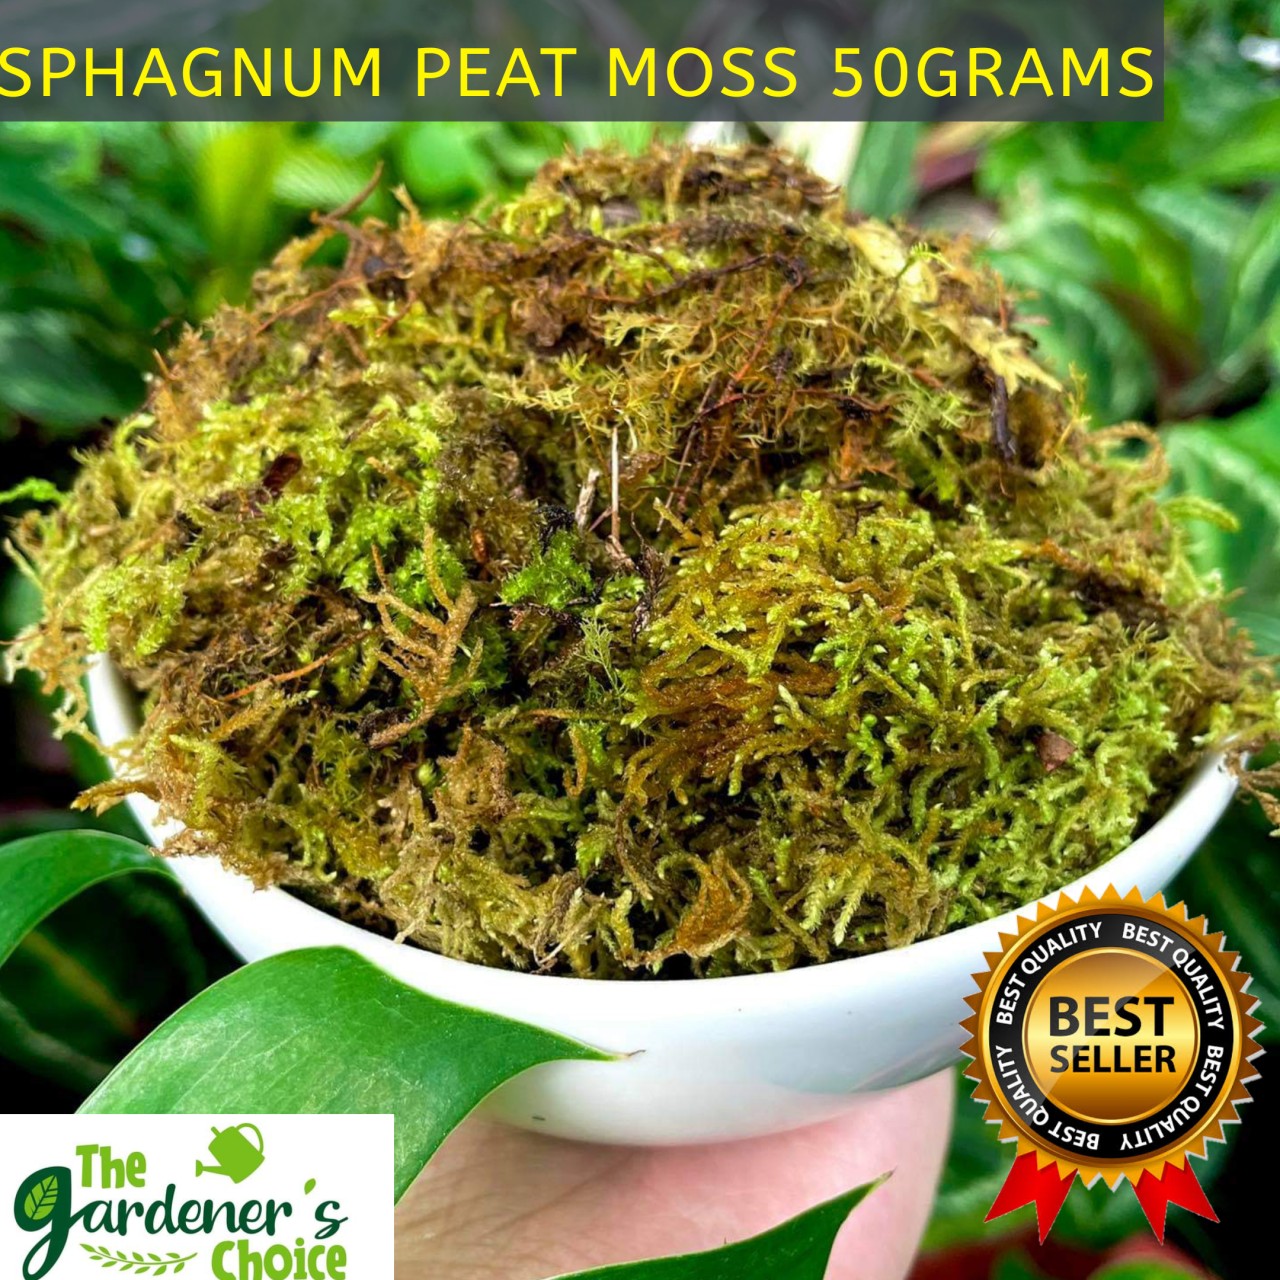 What's the Difference Between Sphagnum Moss vs Peat Moss? - Garden